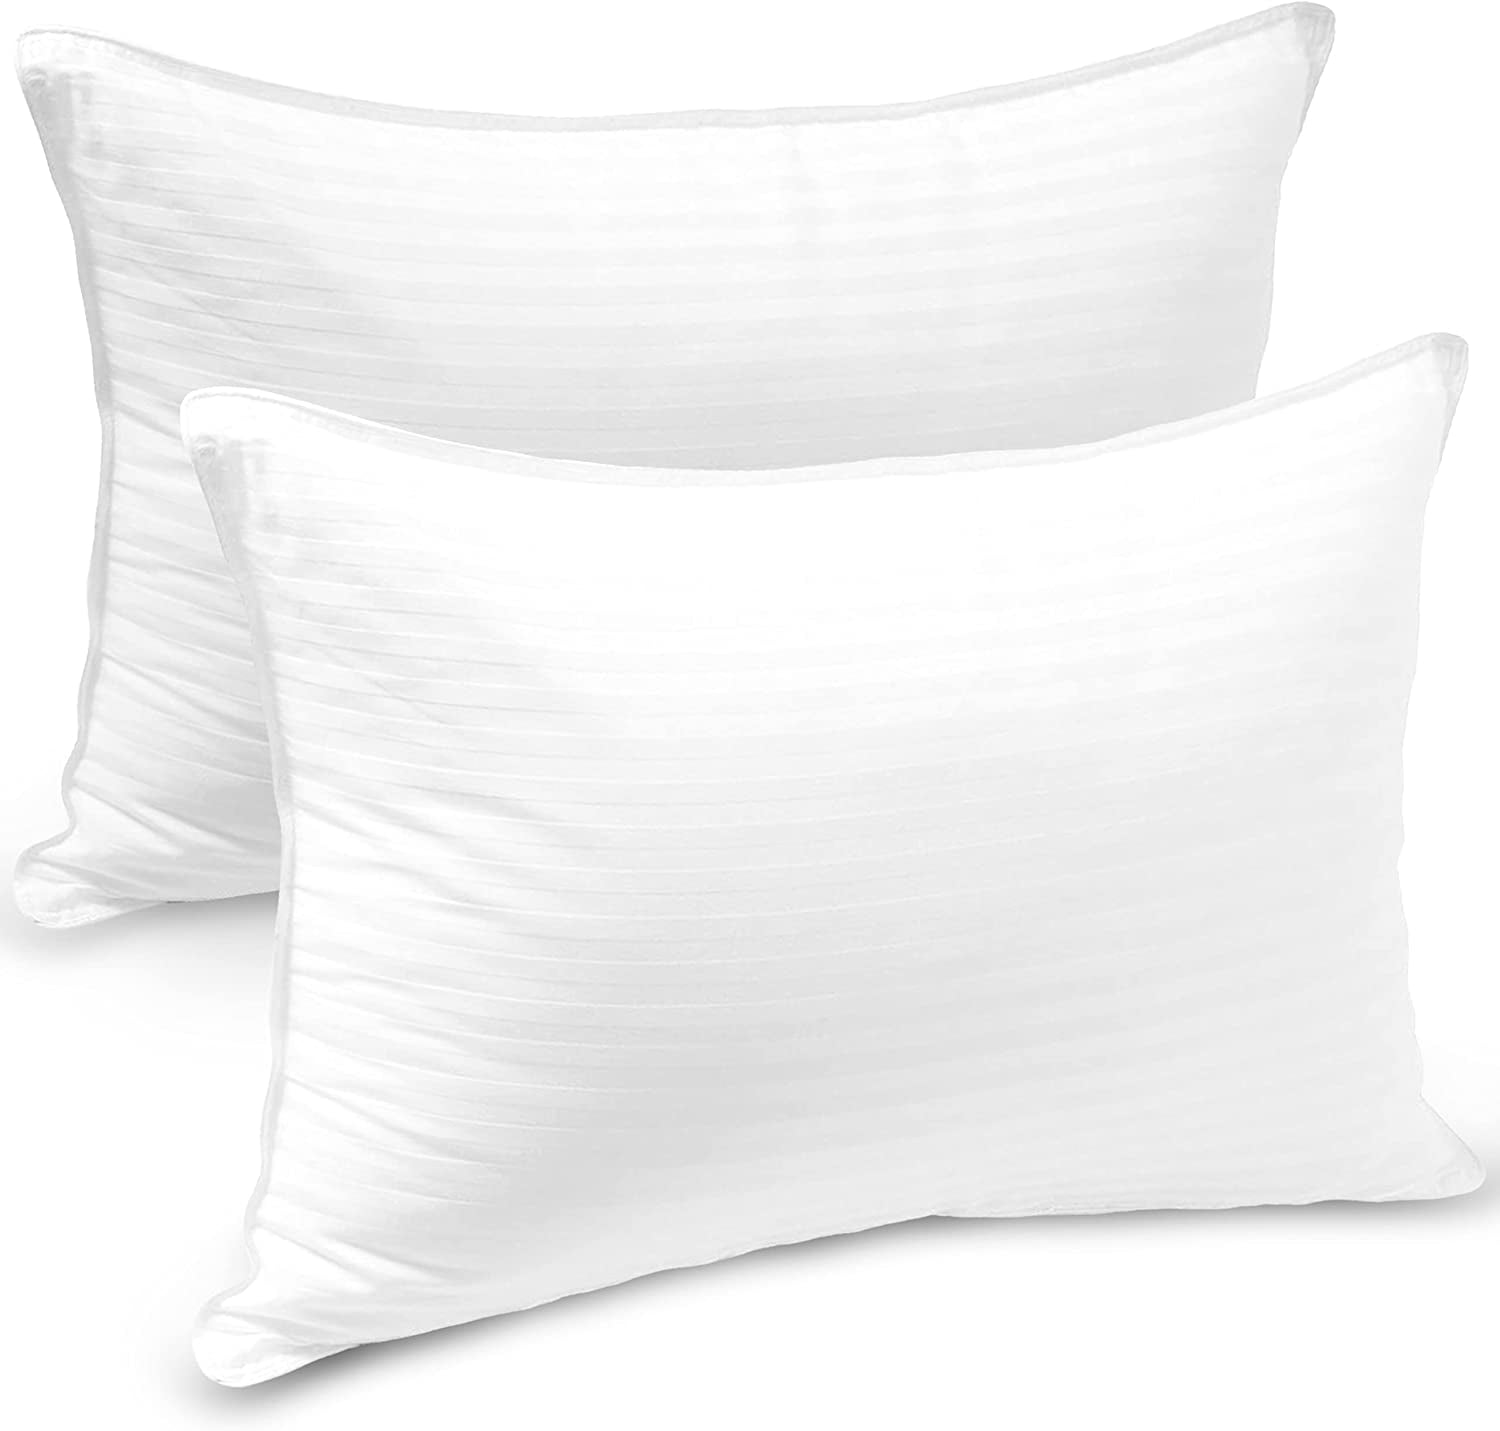 Pillows Quilted Luxury Ultra Loft Jumbo Super Bounce Back Pillows 2 Pack 